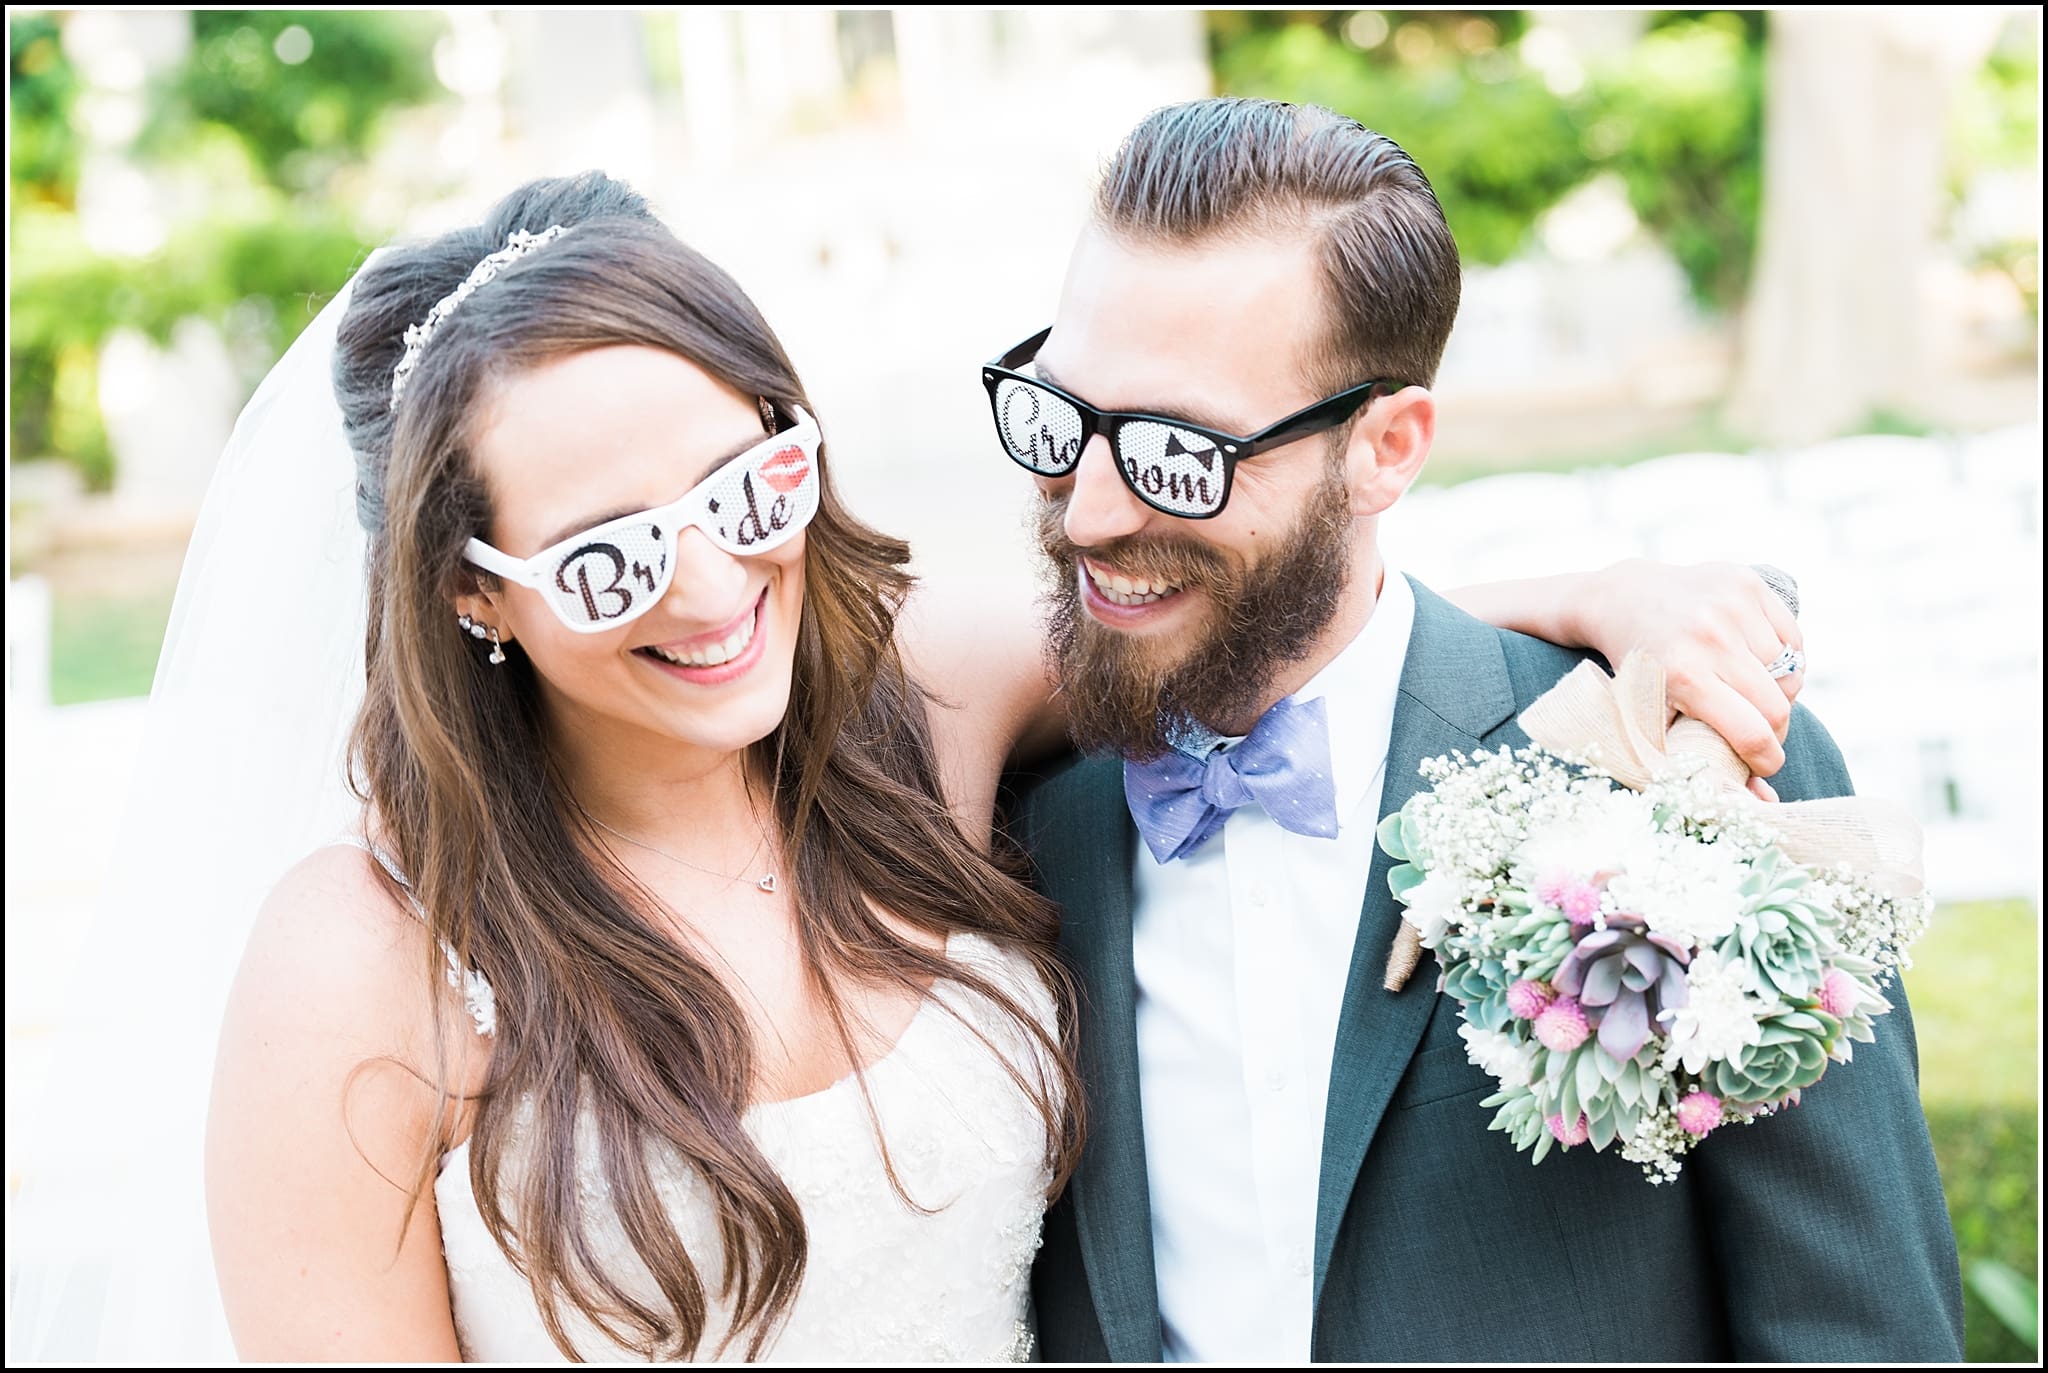  favorite wedding images 2016, wedding photos from 2016, our favorite wedding photos, camarillo wedding, bride and groom sunglasses